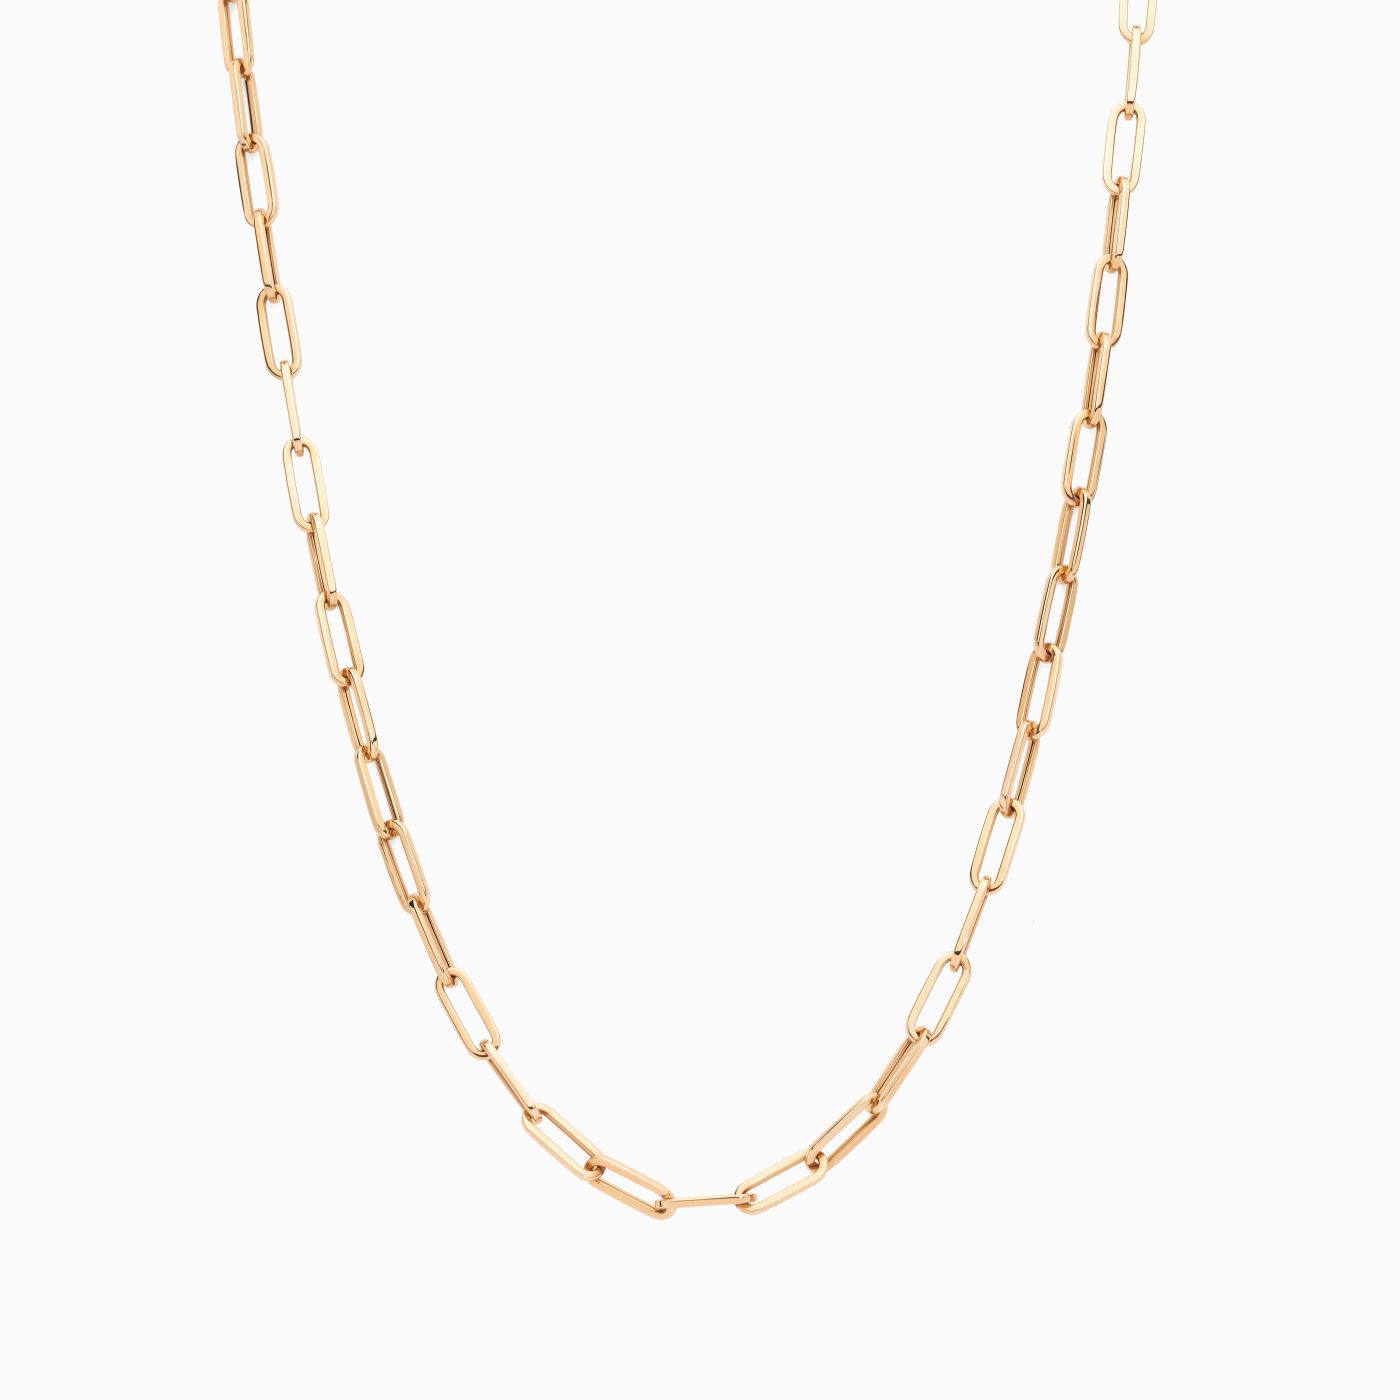 Necklace RABAT chain in rose gold 